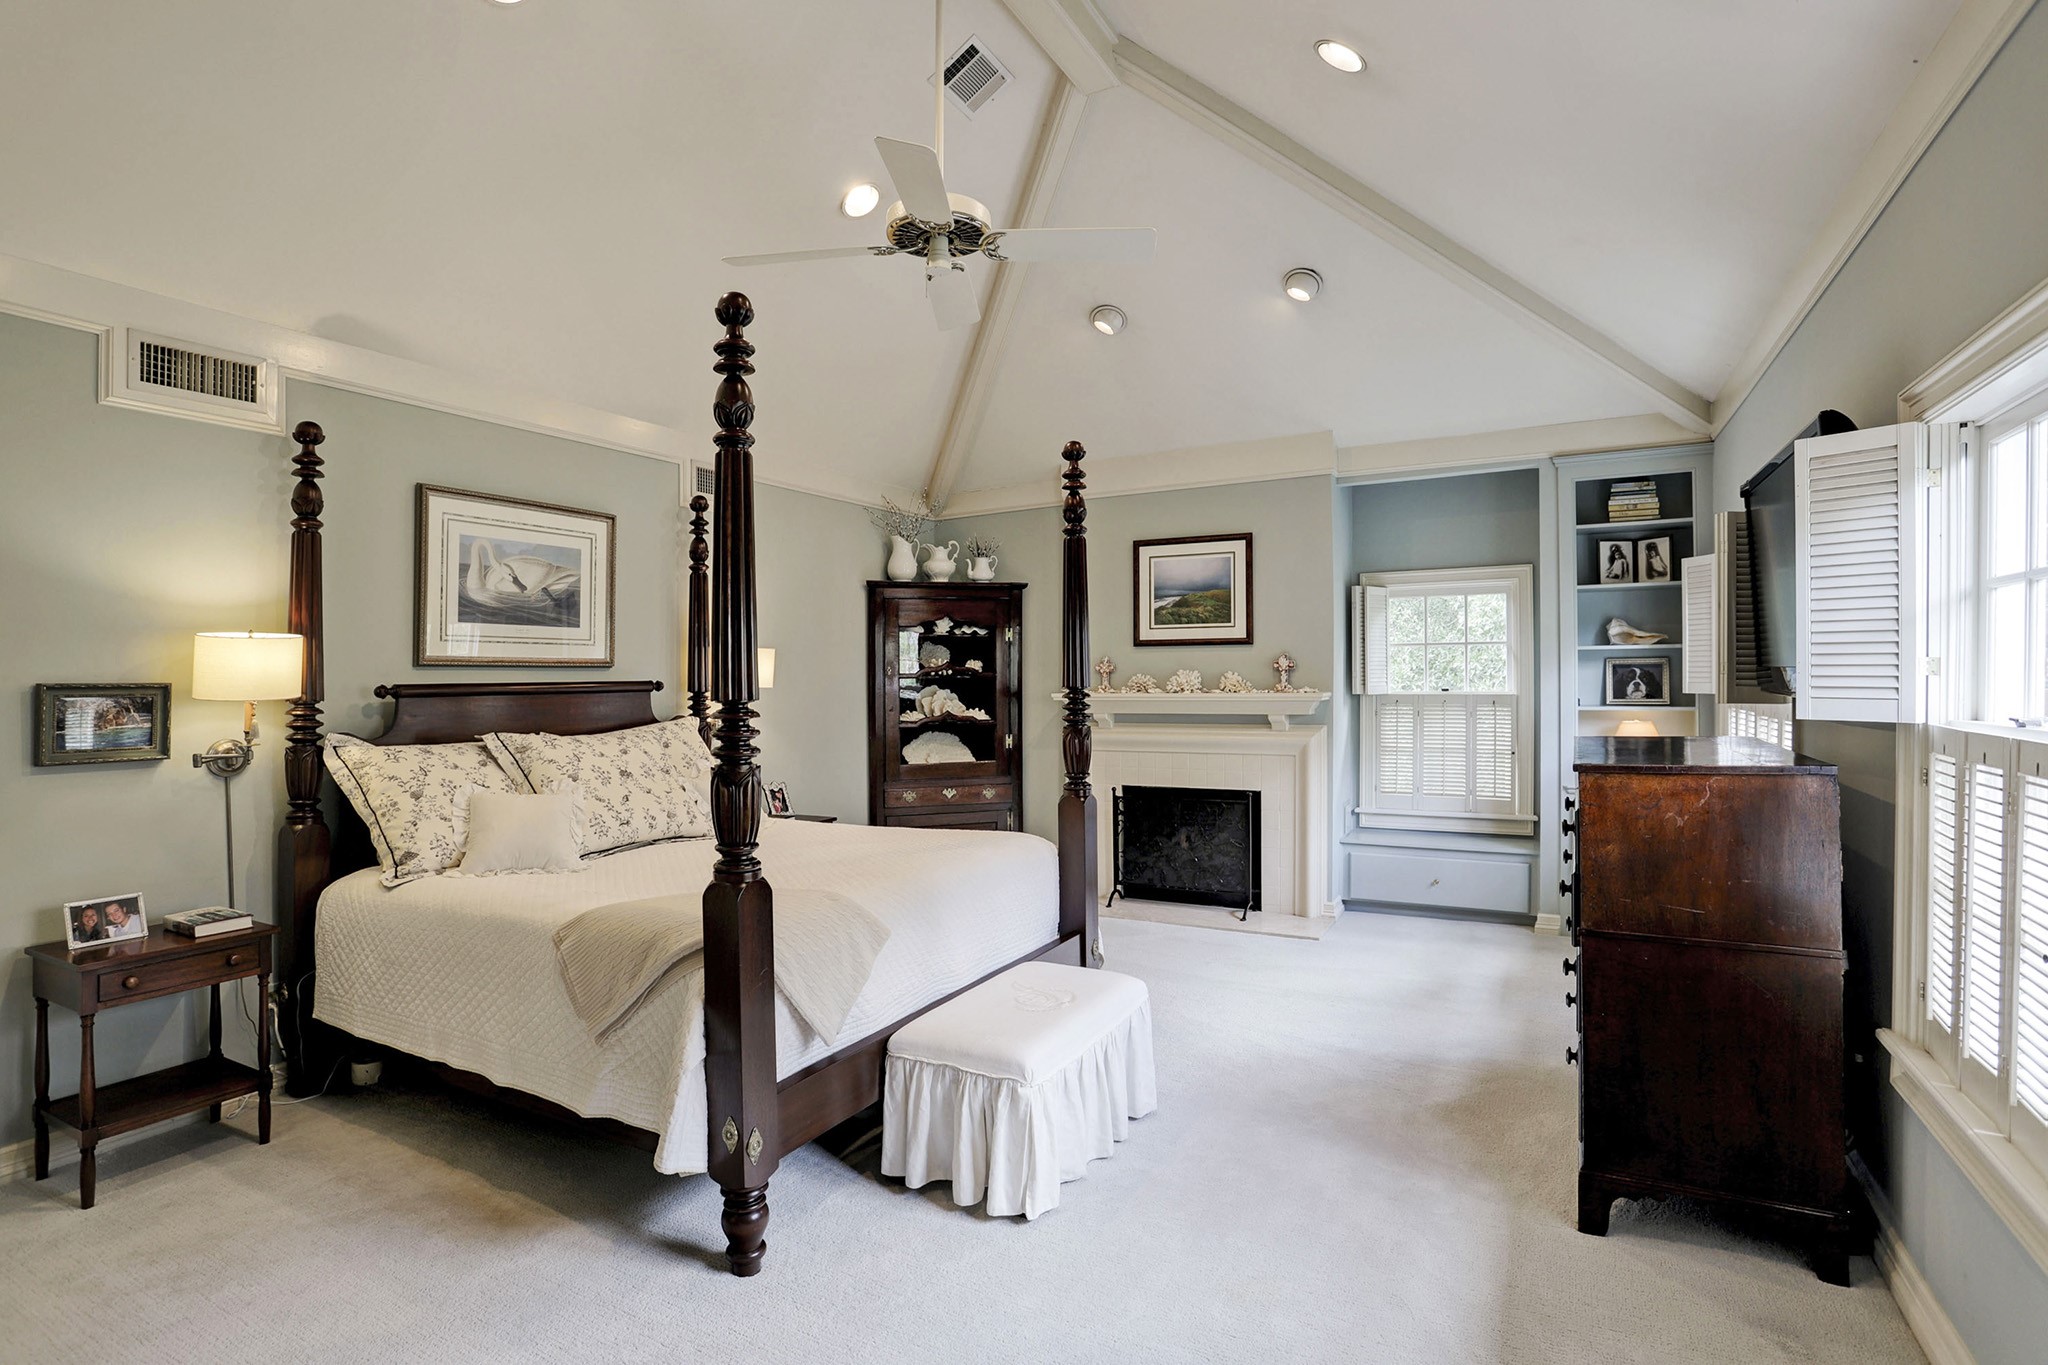 The primary bedroom features tall ceilings, a gas fireplace, and ample natural light.